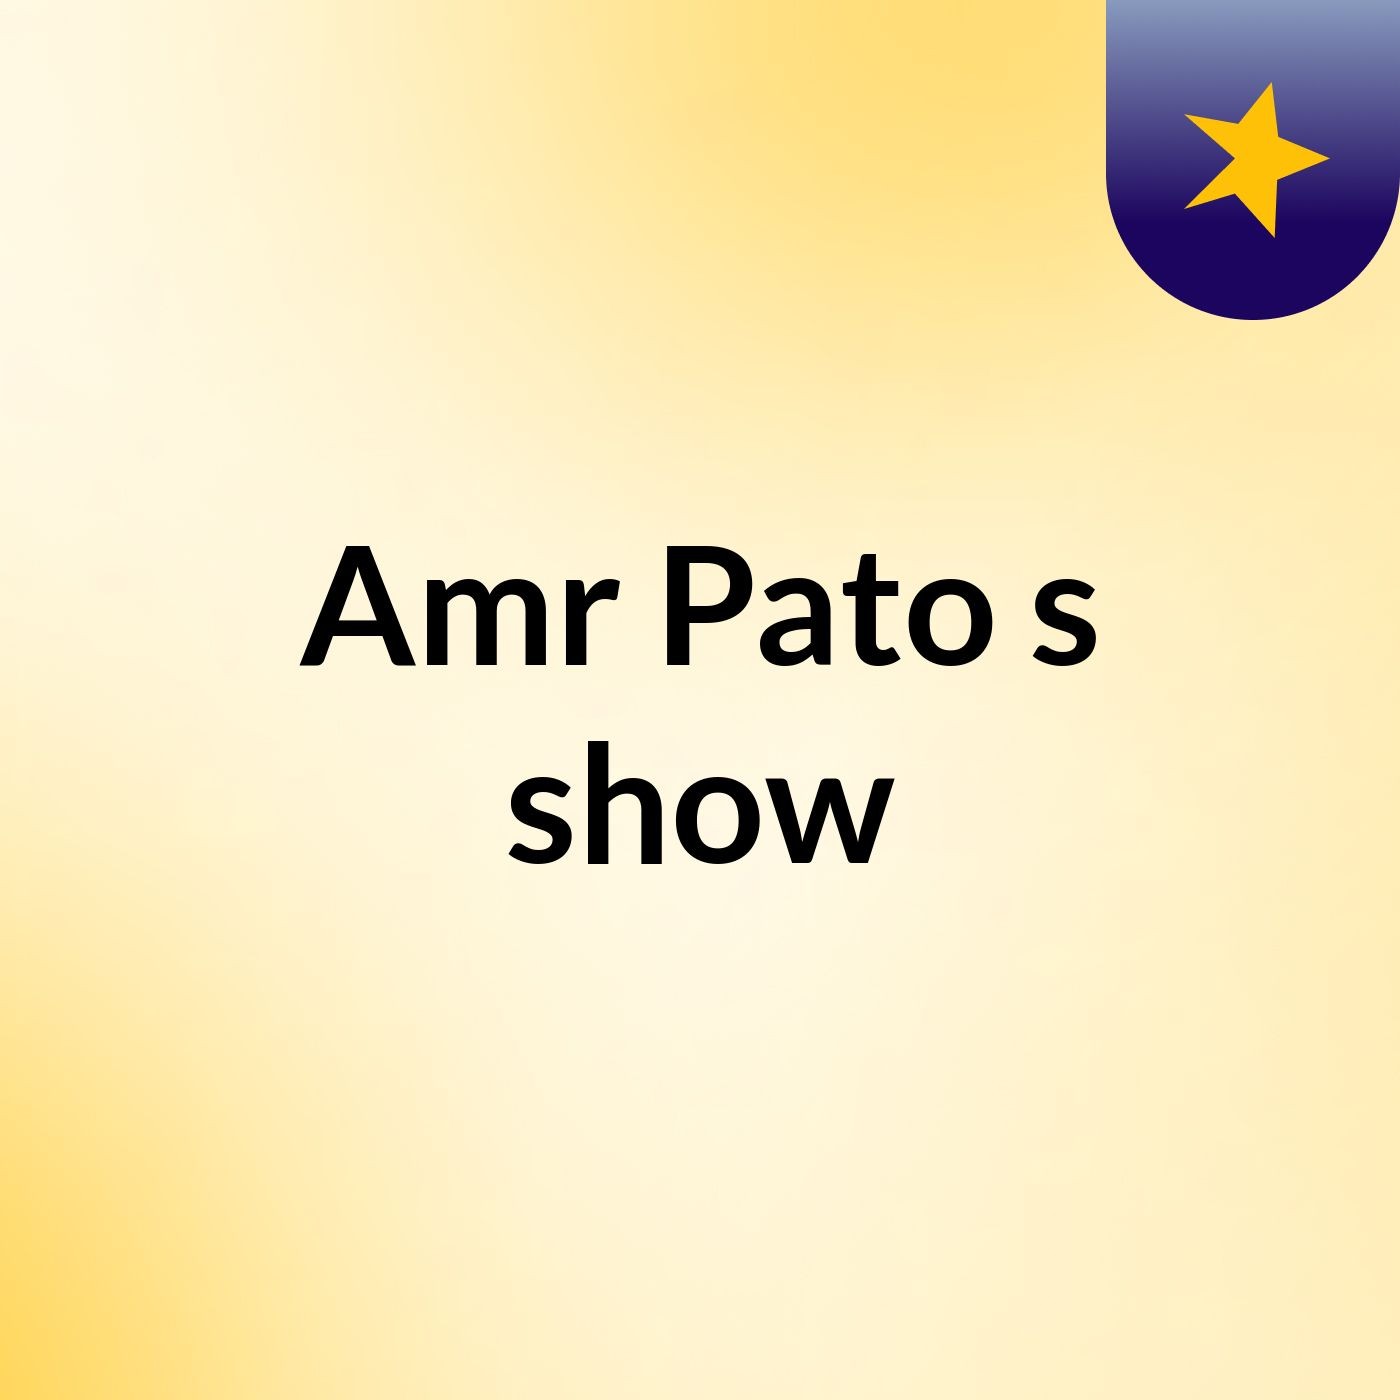 Amr Pato's show